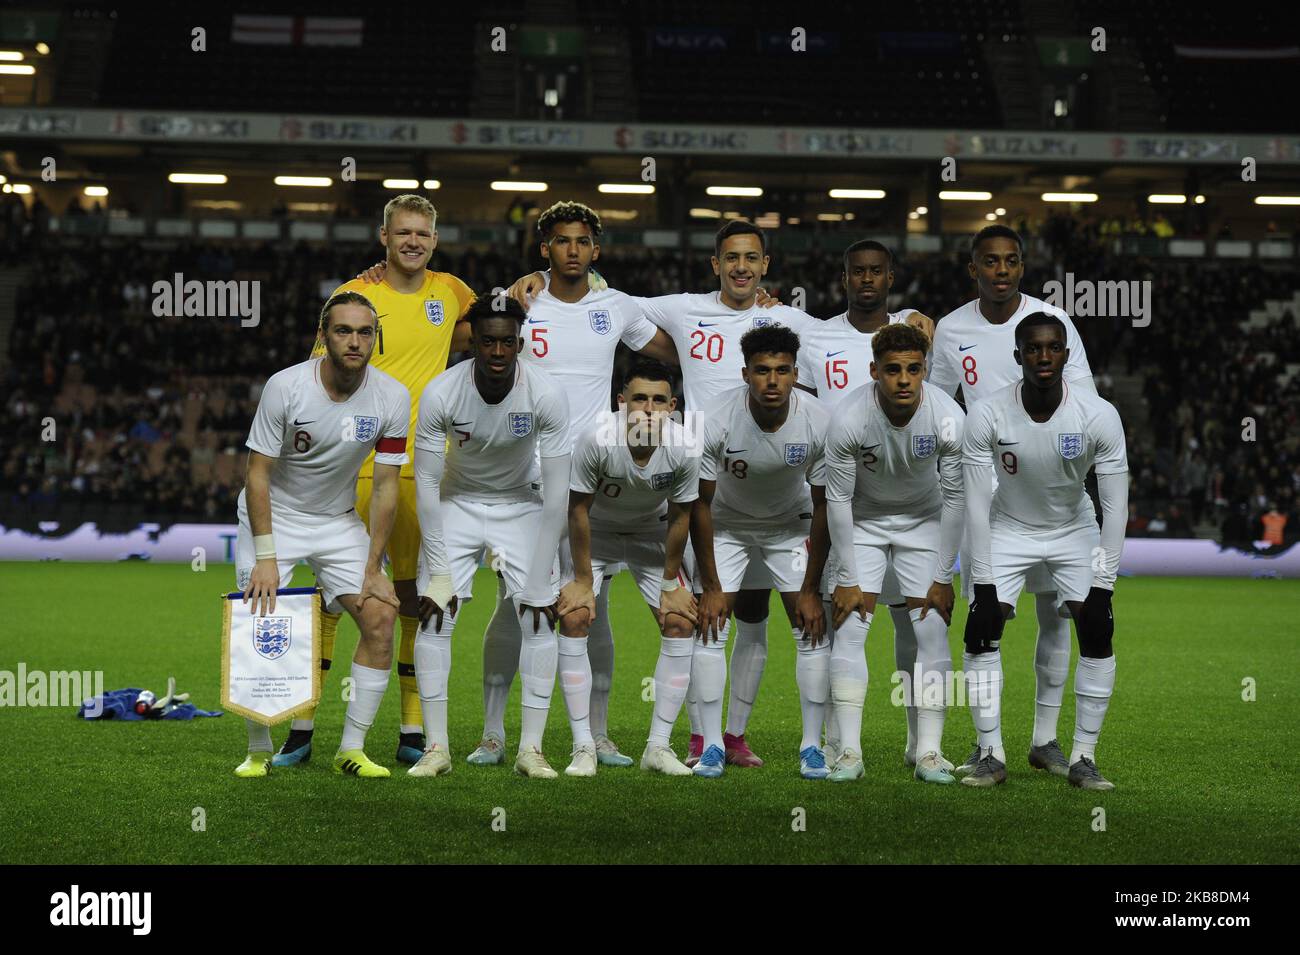 England Under 21s Team Photo Back Row:- Aaron Ramsdale, Lloyd Kelly, Dwight McNeil, Marc Guehi and Joe Willock of England U21s. Front Row:- Tom Davies, Callum Hudson-Odoi, Phil Foden, James Justin, Max Aarons and Eddie Nketiah of England U21s. during UEFA Under 21 Championship Qualifiers between England Under 21 and Austria Under 21 at Stadium MK in Milton Keynes, England on October 15, 2019 (Photo by Action Foto Sport/NurPhoto) Stock Photo